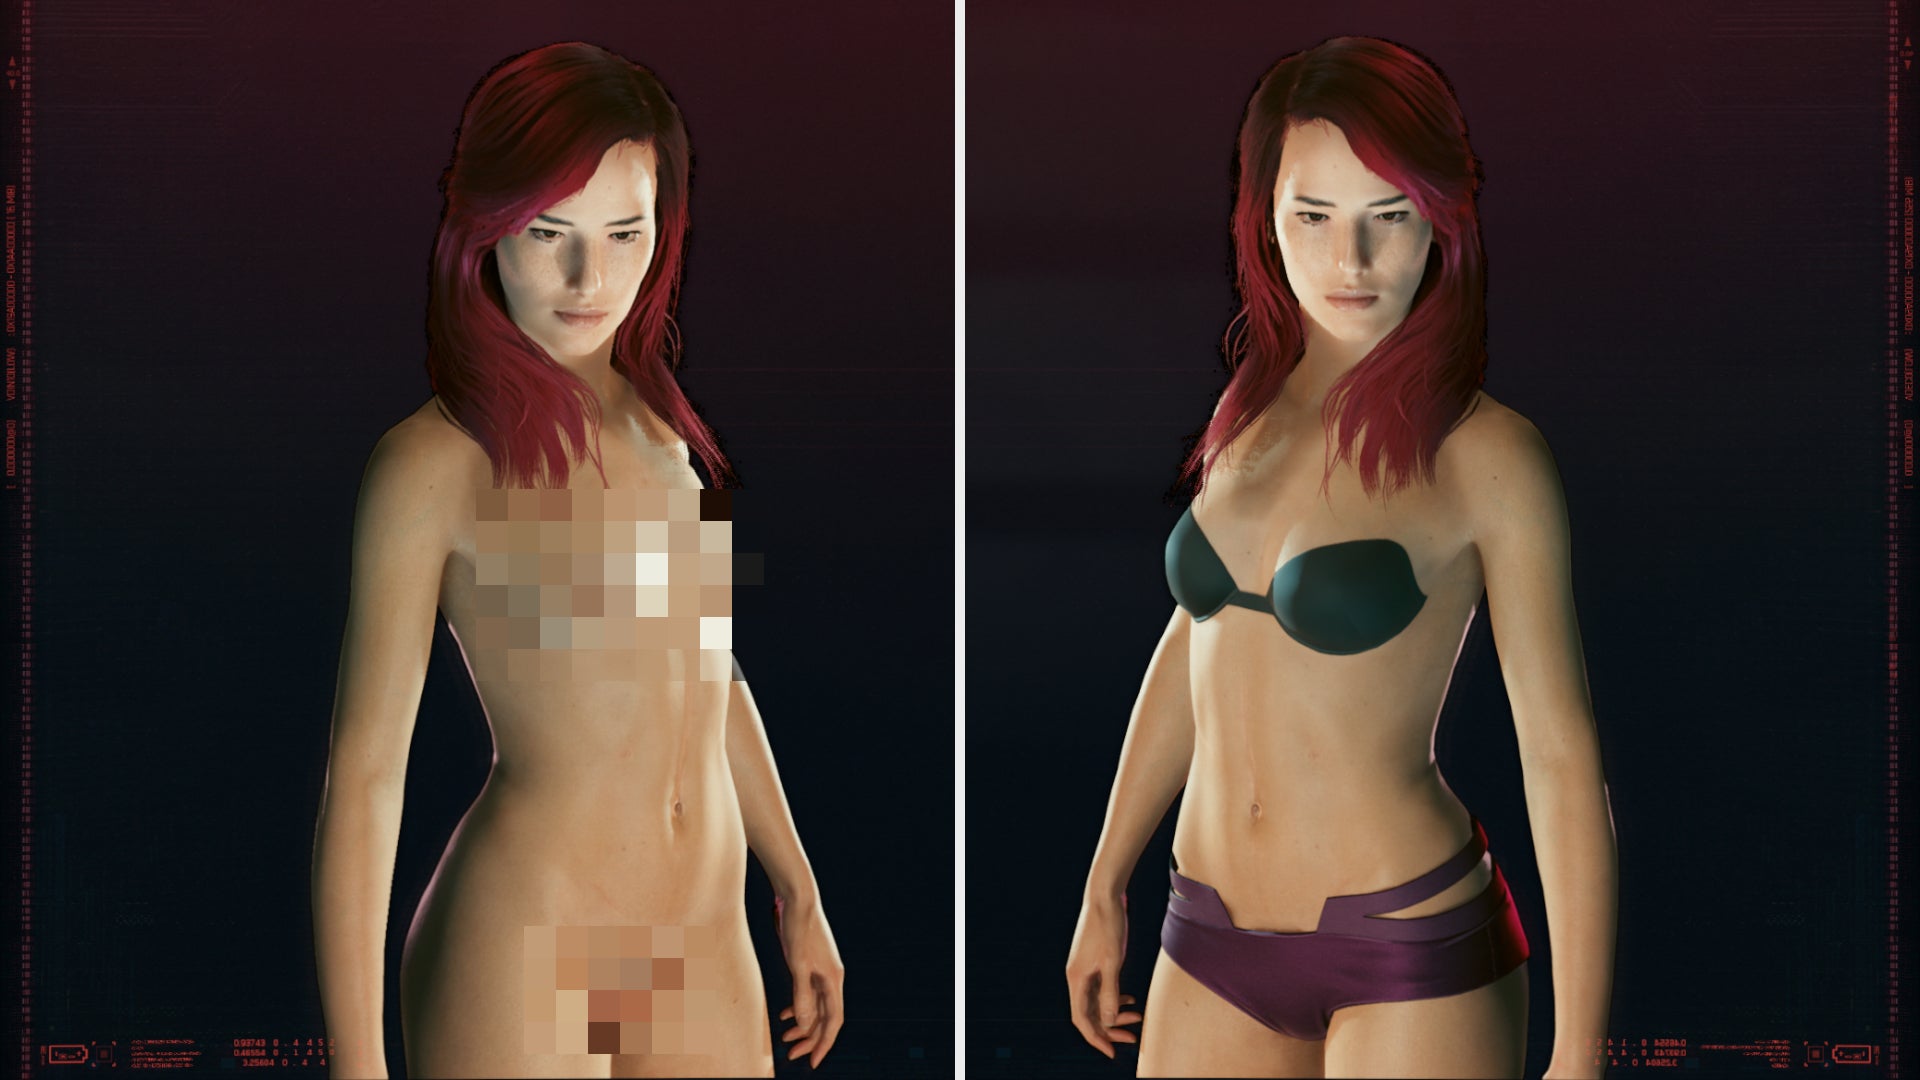 A side-by-side comparison of V in Cyberpunk 2077 wearing no clothes. On the left is with nudity enabled (blurred in post), and on the right is with nudity disabled.